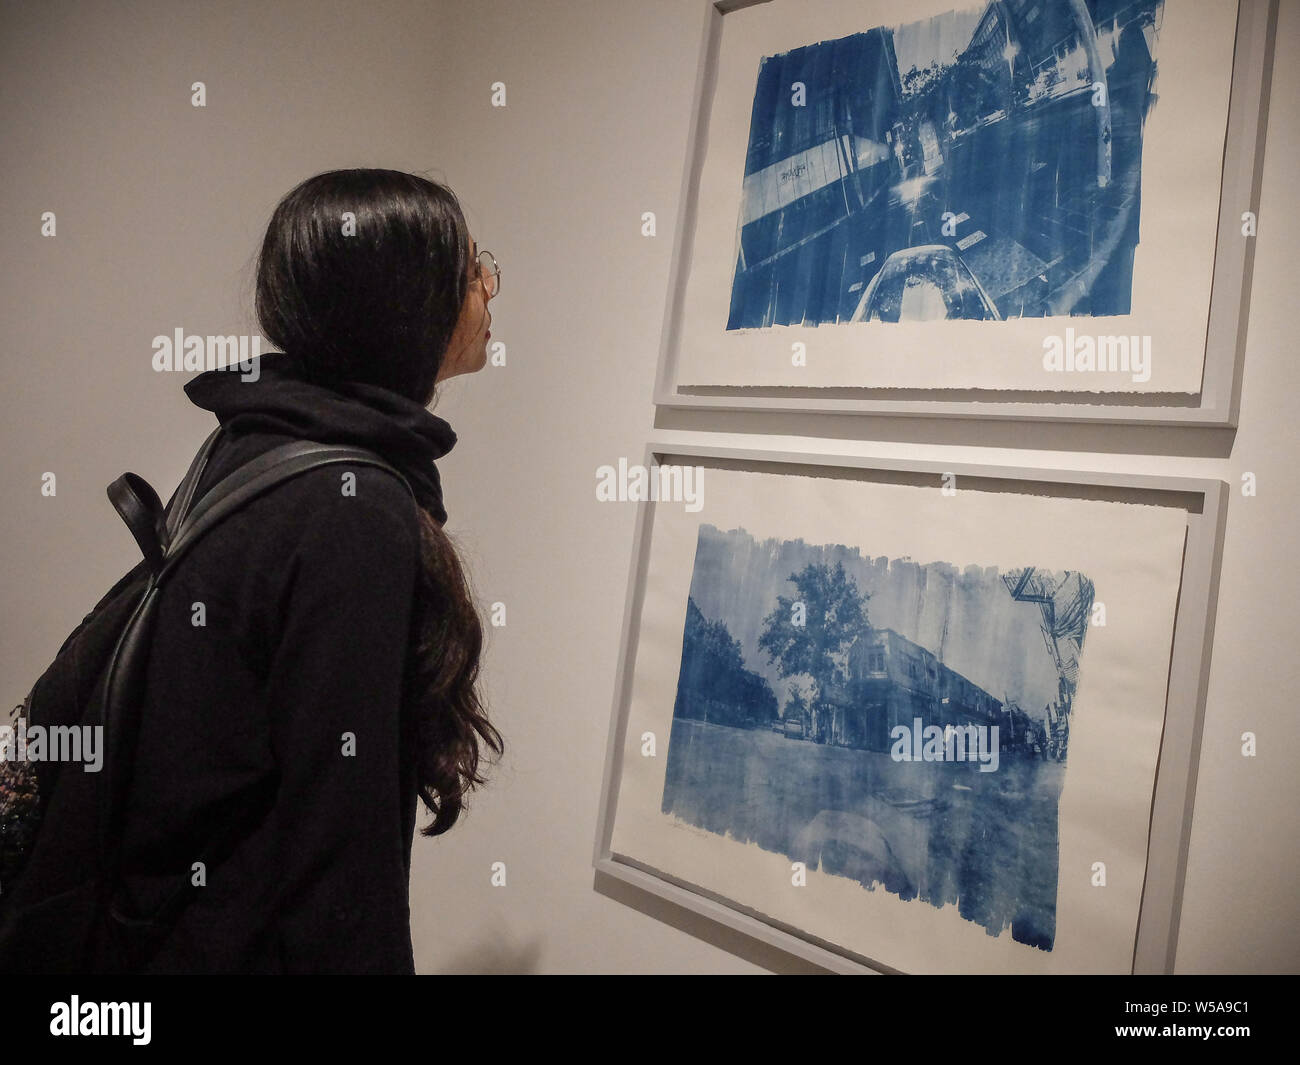 July 26, 2019, Tehran, Tehran, IRAN: People visit Vahid Dashtyari and Mehdi Khandan's photo exhibition at Mohsen Gallery in downtown Tehran, Iran. The two-man photo show by Vahid Dashtyari and Mehdi Khandan is about alternative photographic processes, namely gelatin silver, and cyanotype, to record reality: One is seeking to recover the lost spirit of photography and revert something fake to its original form, while the other is searching for the lost soul of the city, changing something authentic to a counterfeit. Credit: Rouzbeh Fouladi/ZUMA Wire/Alamy Live News Stock Photo